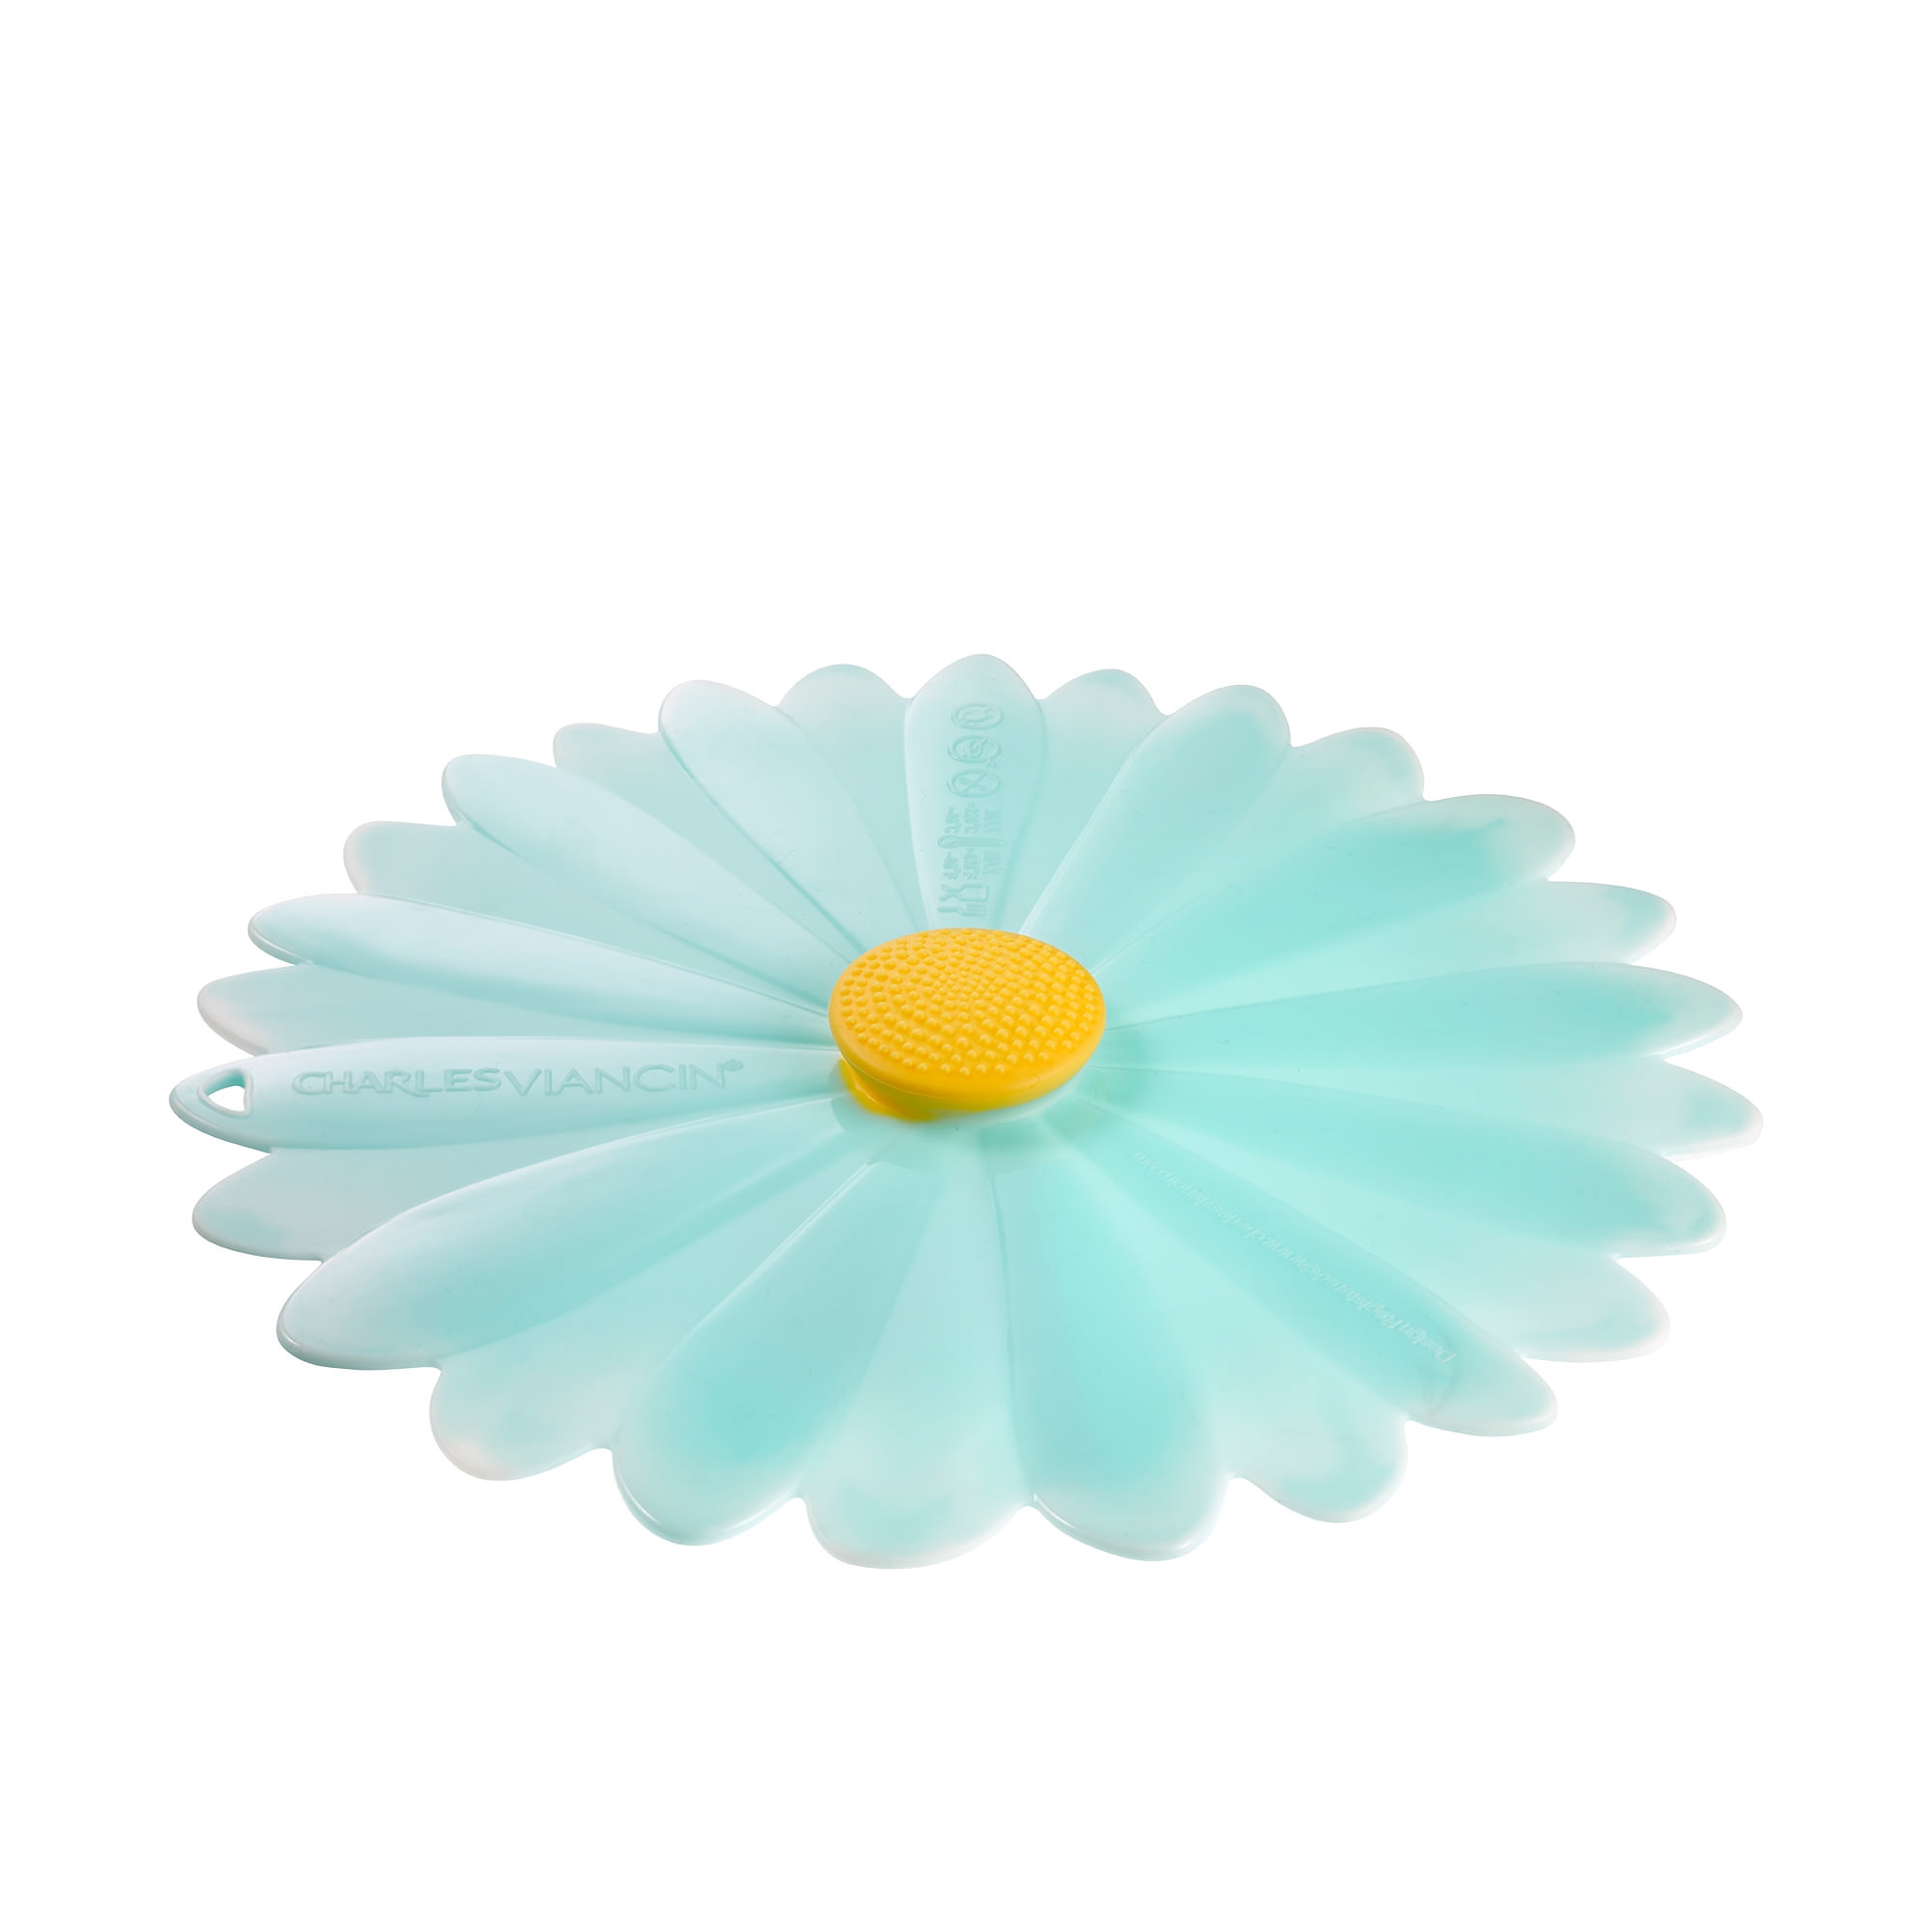 Charles Viancin Daisy Silicone Lid 28cm Blue Image 1